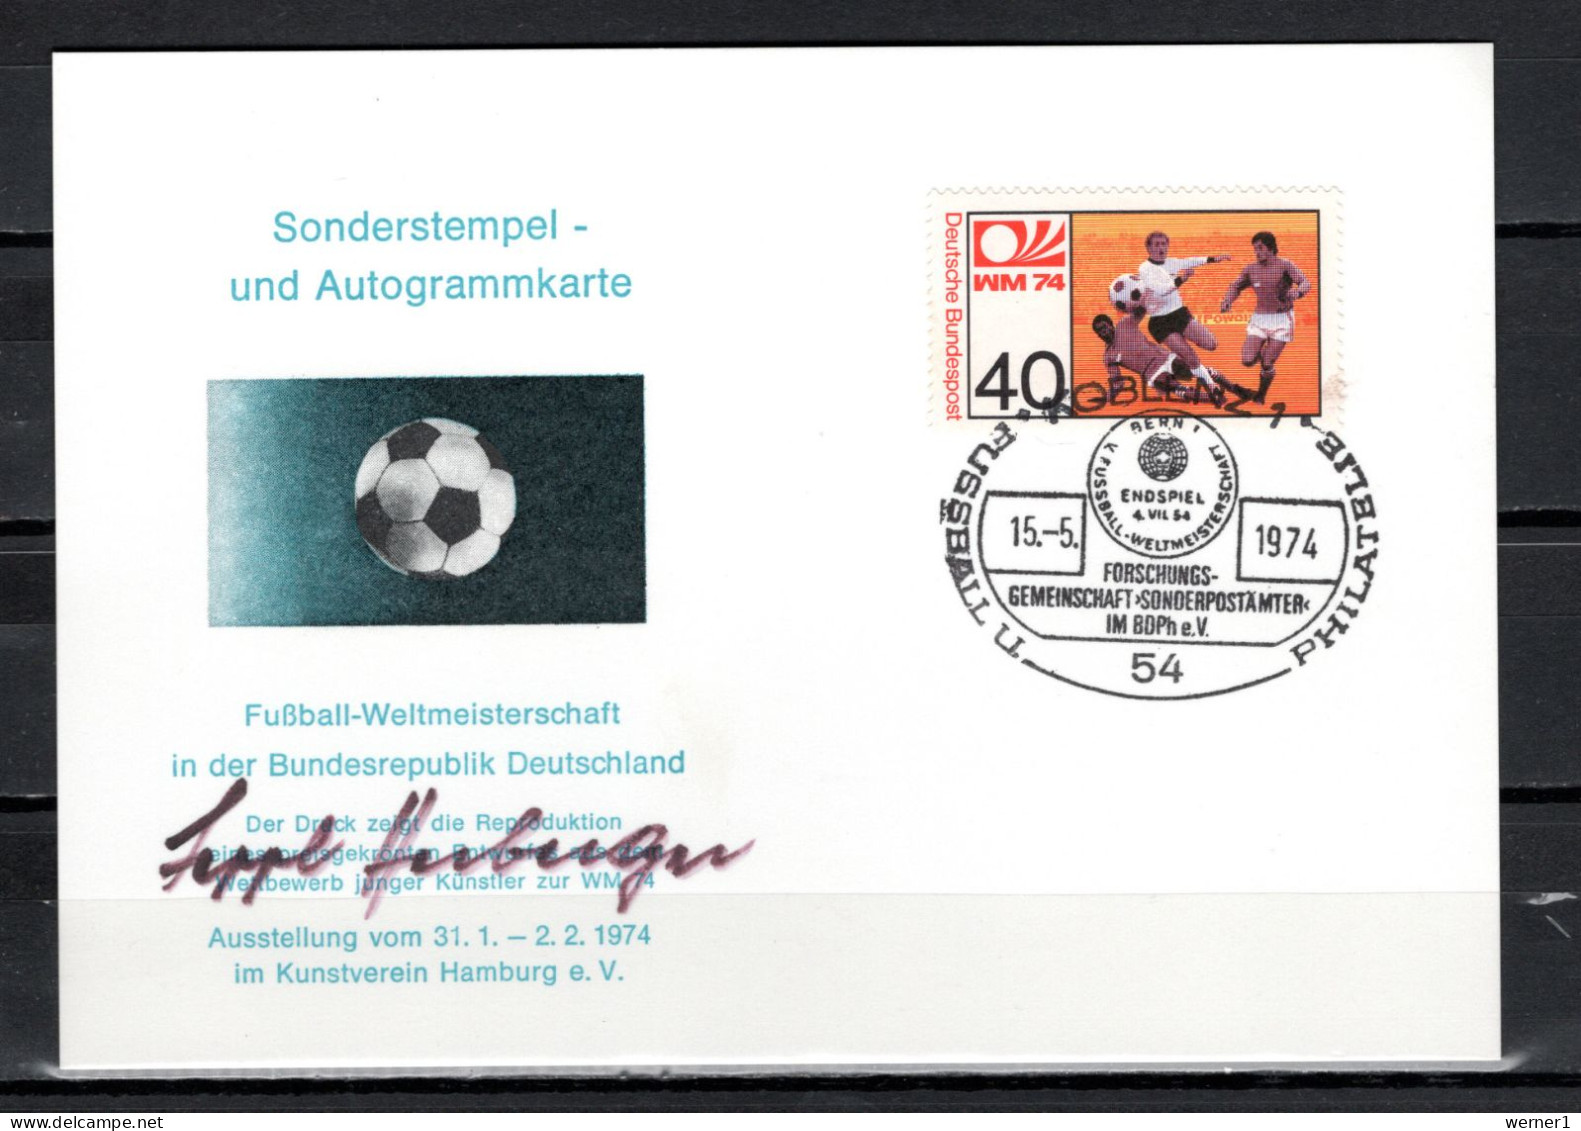 Germany 1974 Football Soccer World Cup Autograph Postcard With Original Signature Of Sepp Herberger - 1974 – Allemagne Fédérale